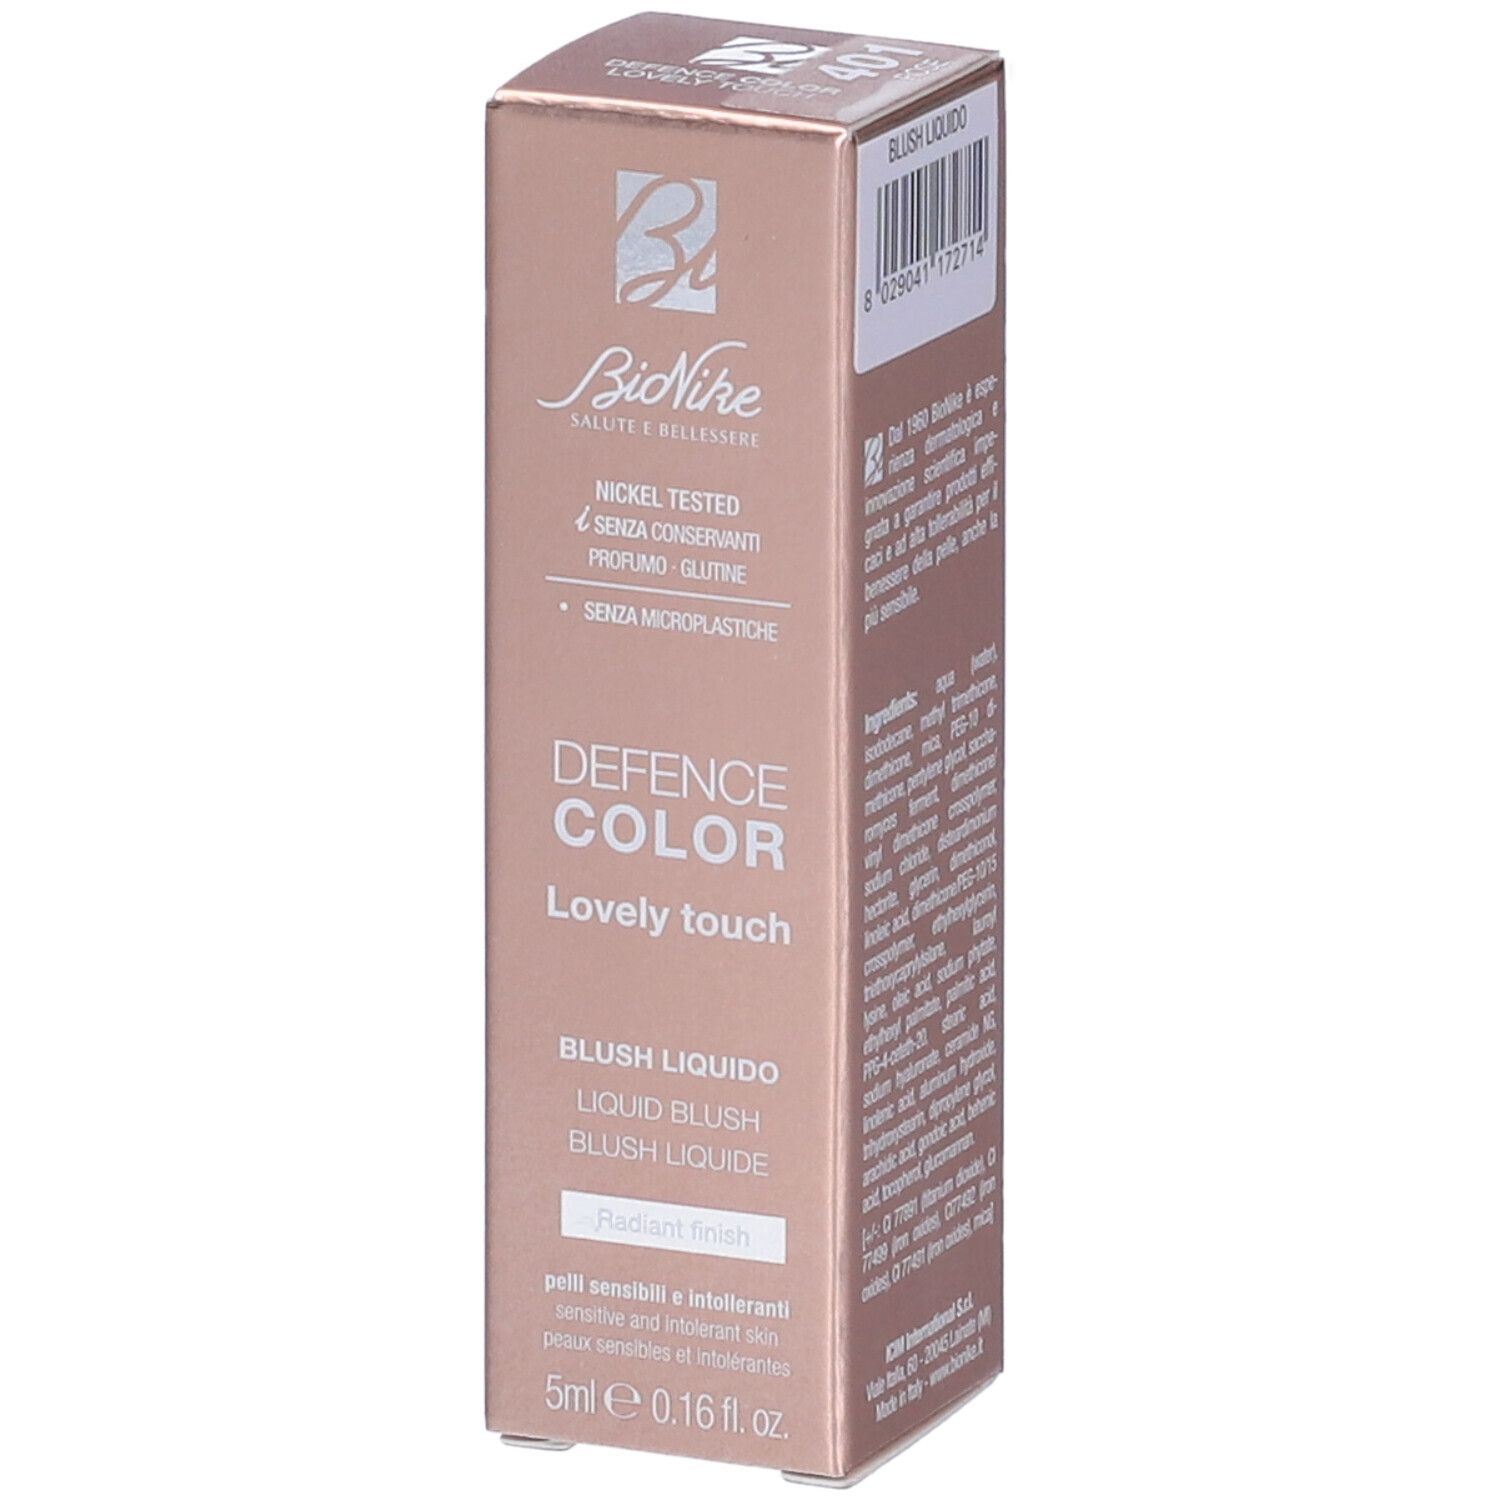 Bionike Defence Color Lovely Touch Blush Liquido Colore 401 Rose